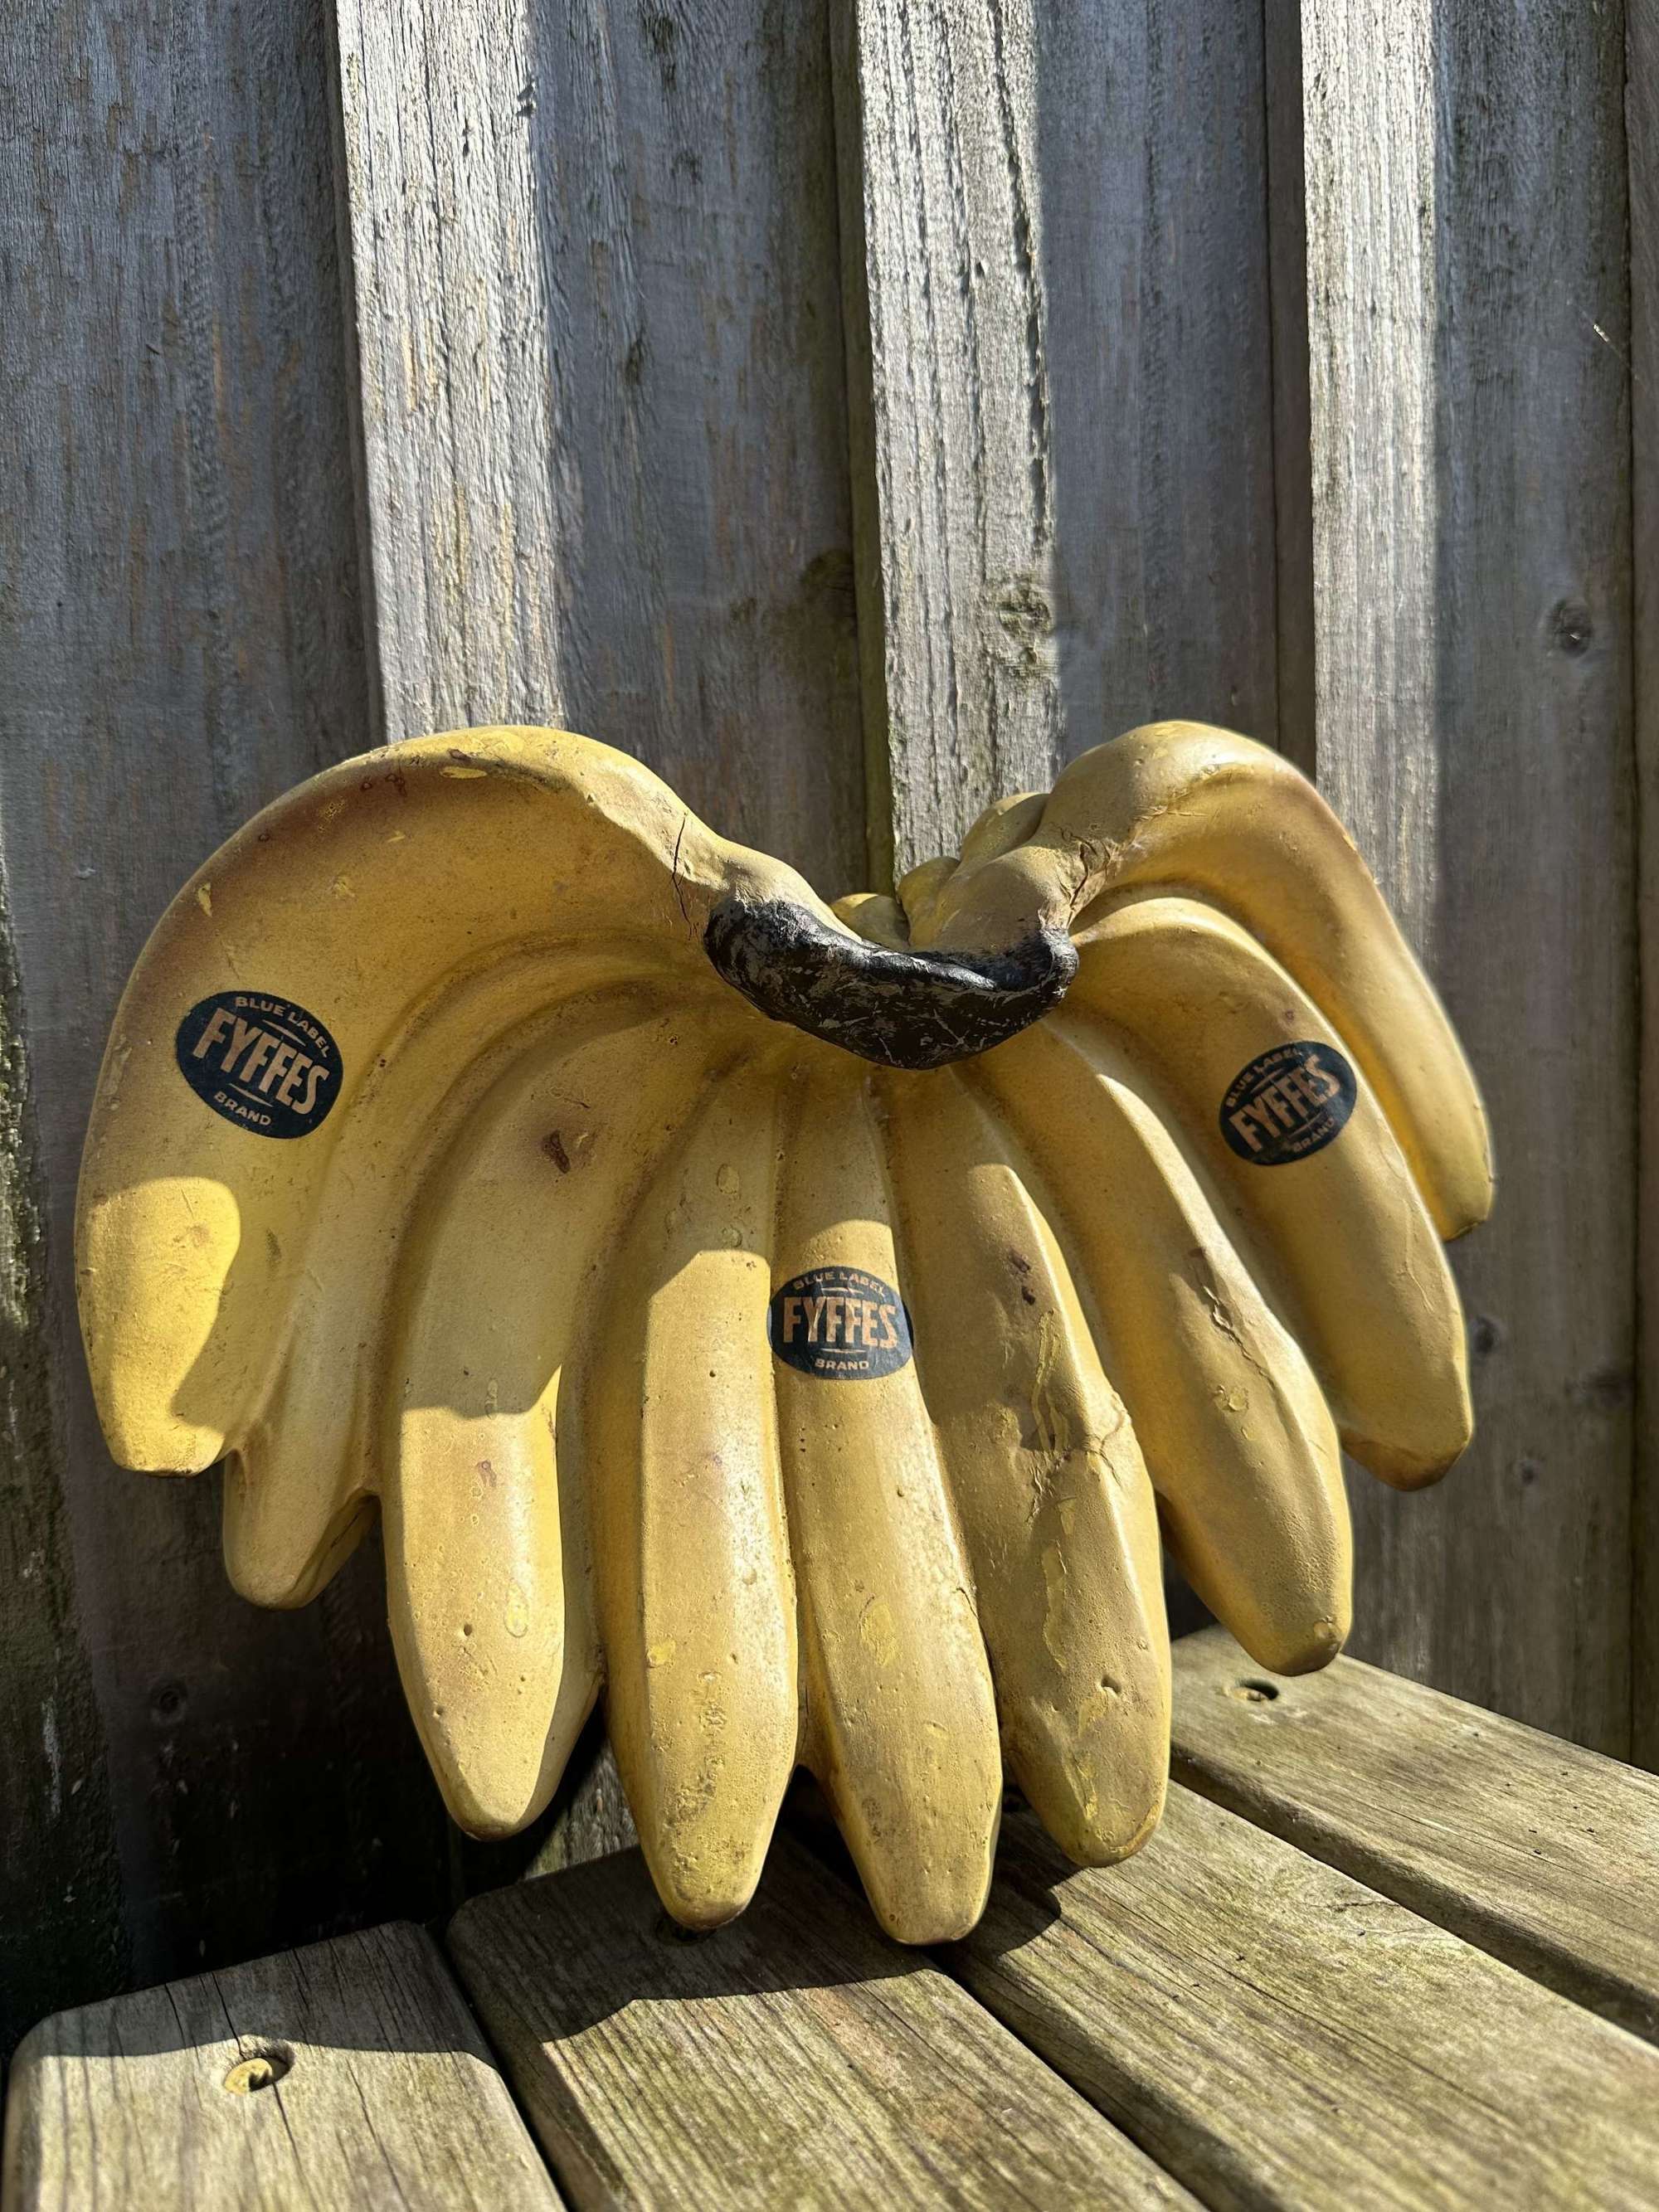 Early unusual advertising figure for fyffes banana